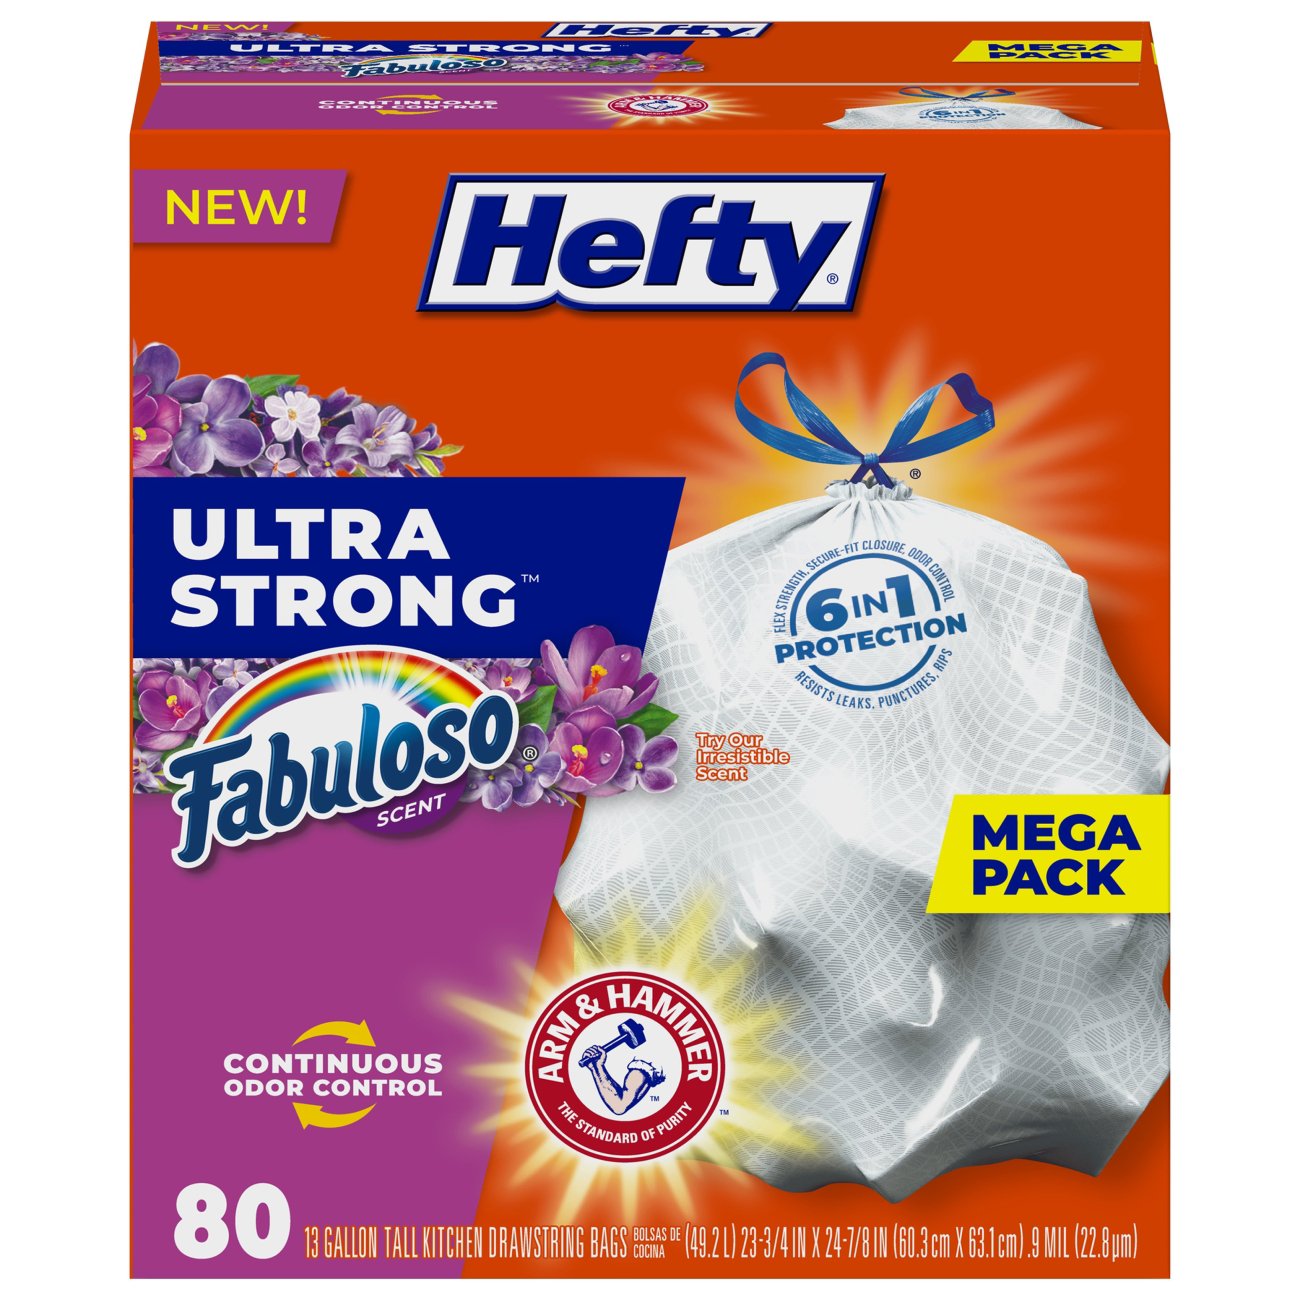 Hefty Small Garbage Bags, Drawstring, Fabuloso Scent, 4 Gallon, 20 Count